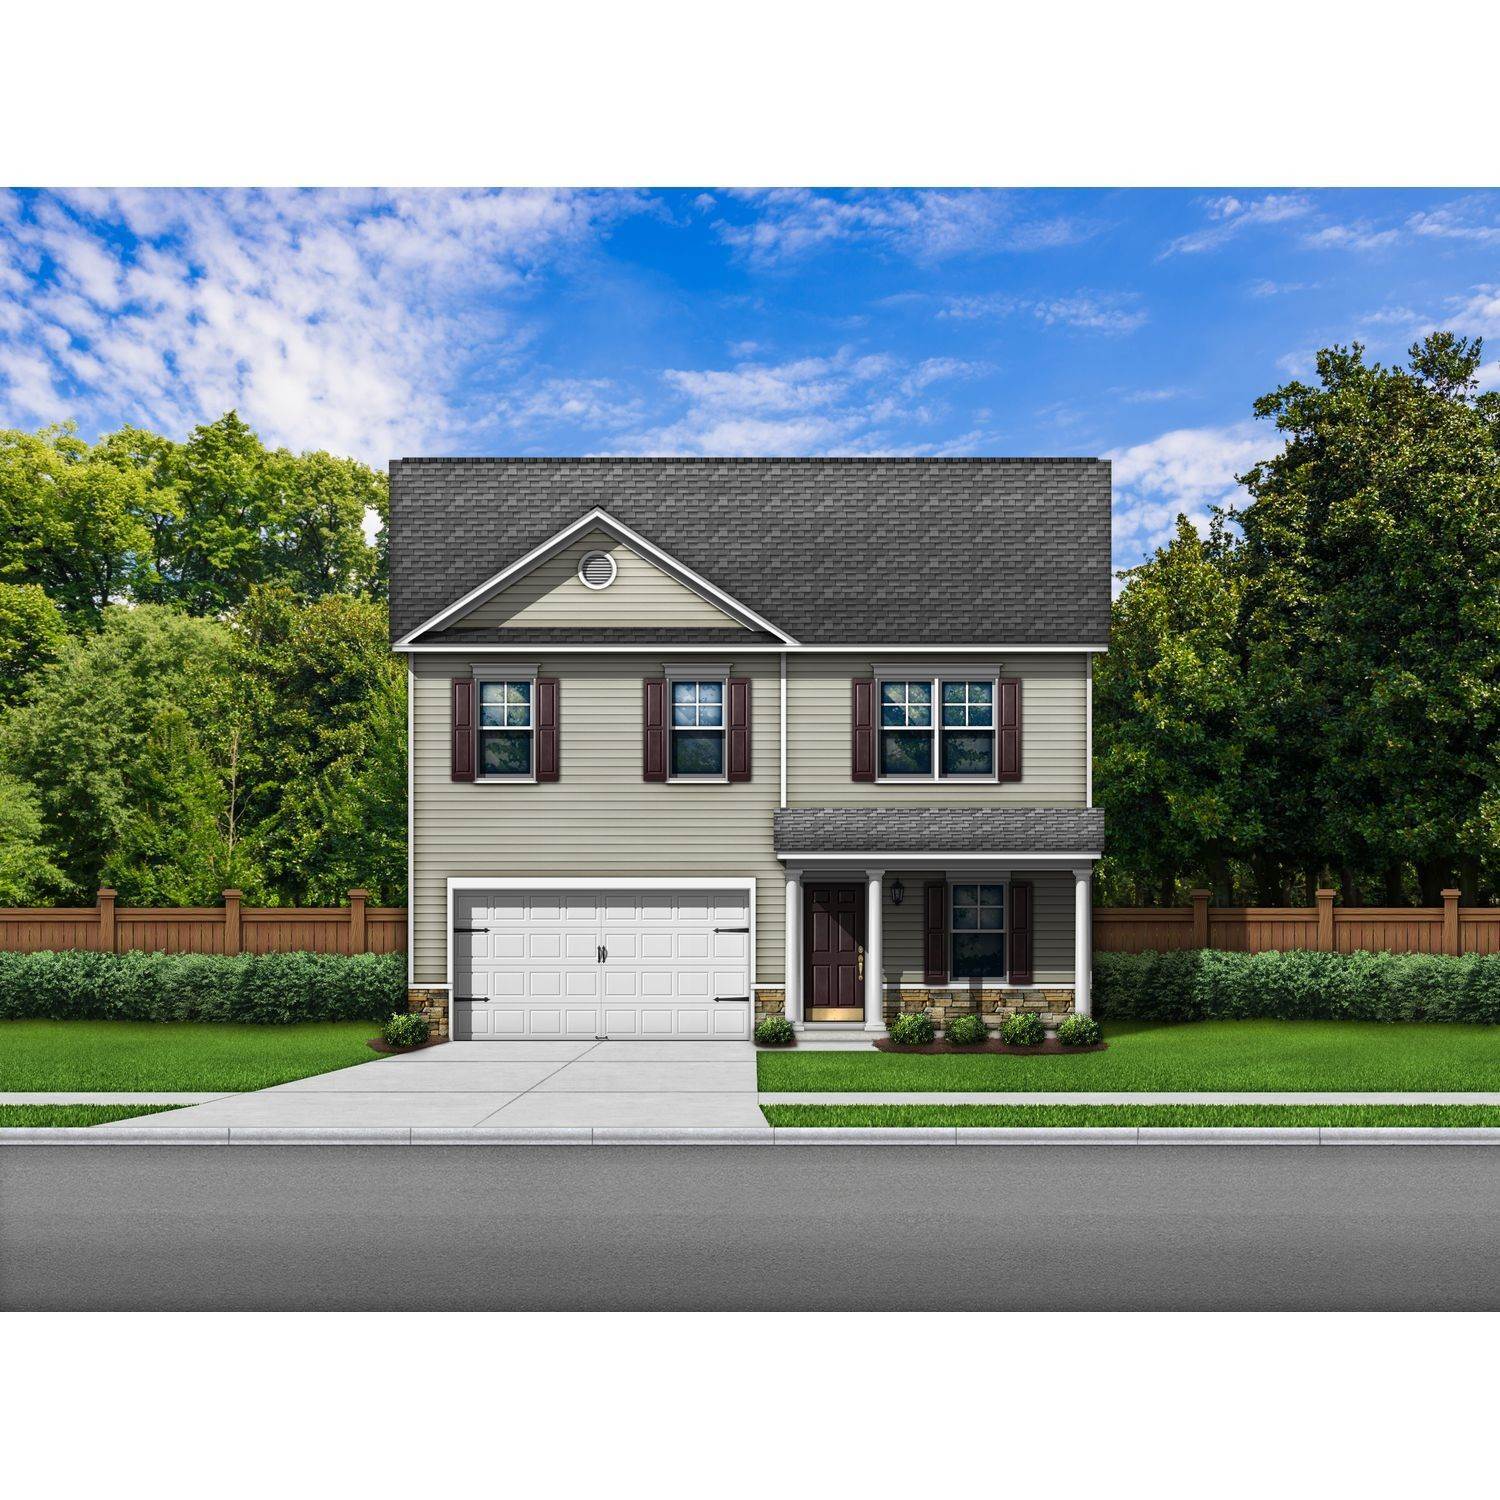 Single Family for Sale at Champions Village At Cherry Hill 448 Seaborn Circle, Pendleton, SC 29670